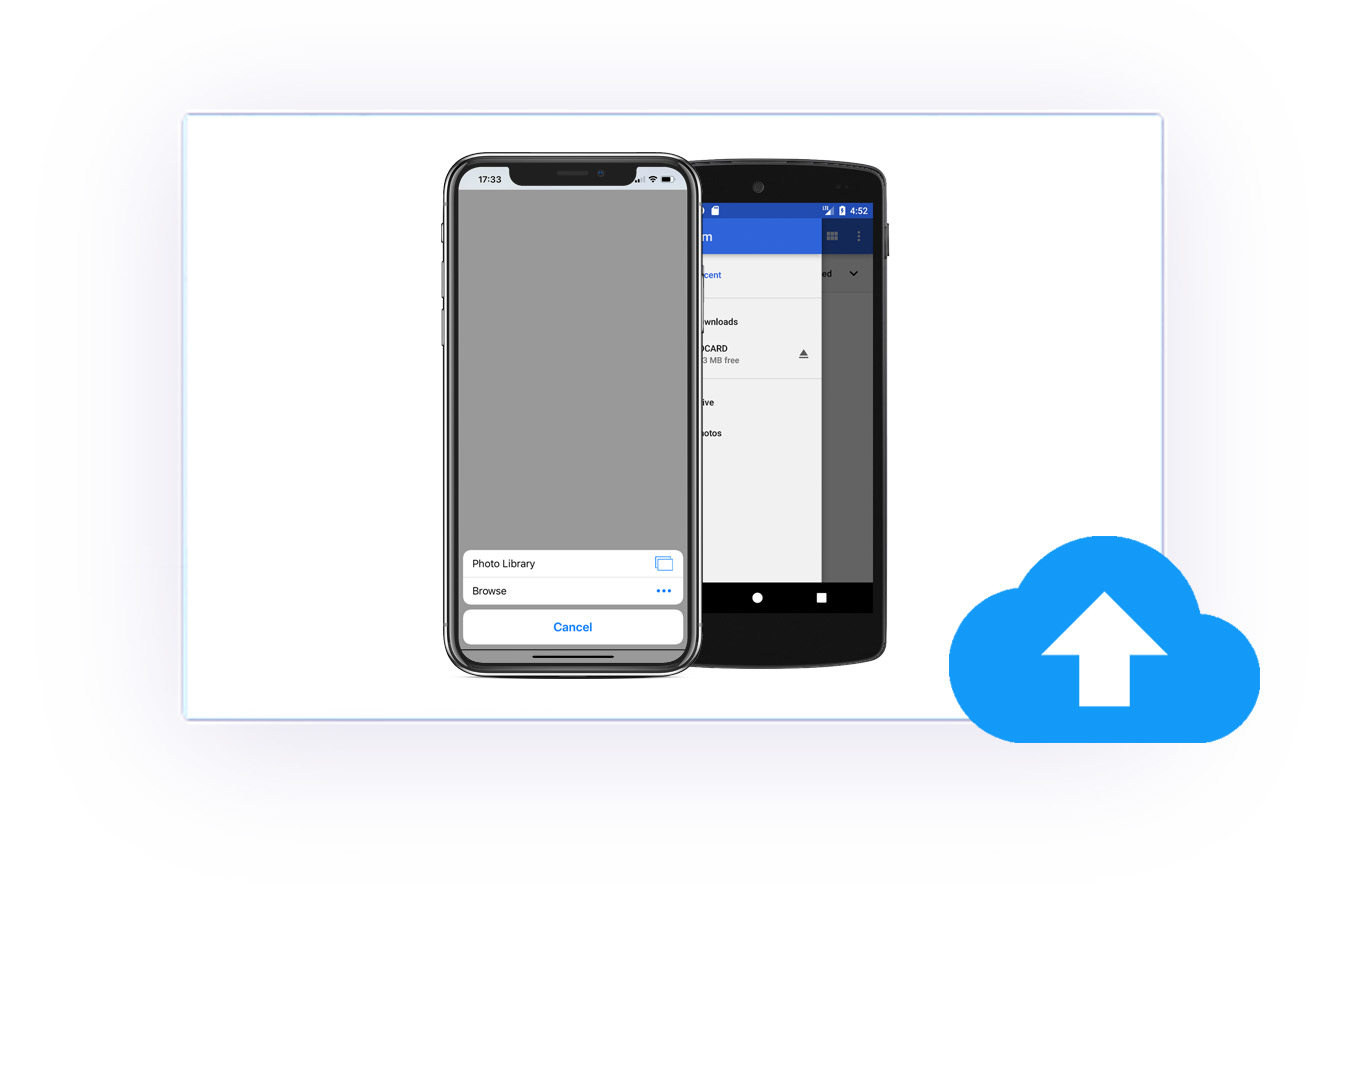 File Upload in WebView app on iOS and Android